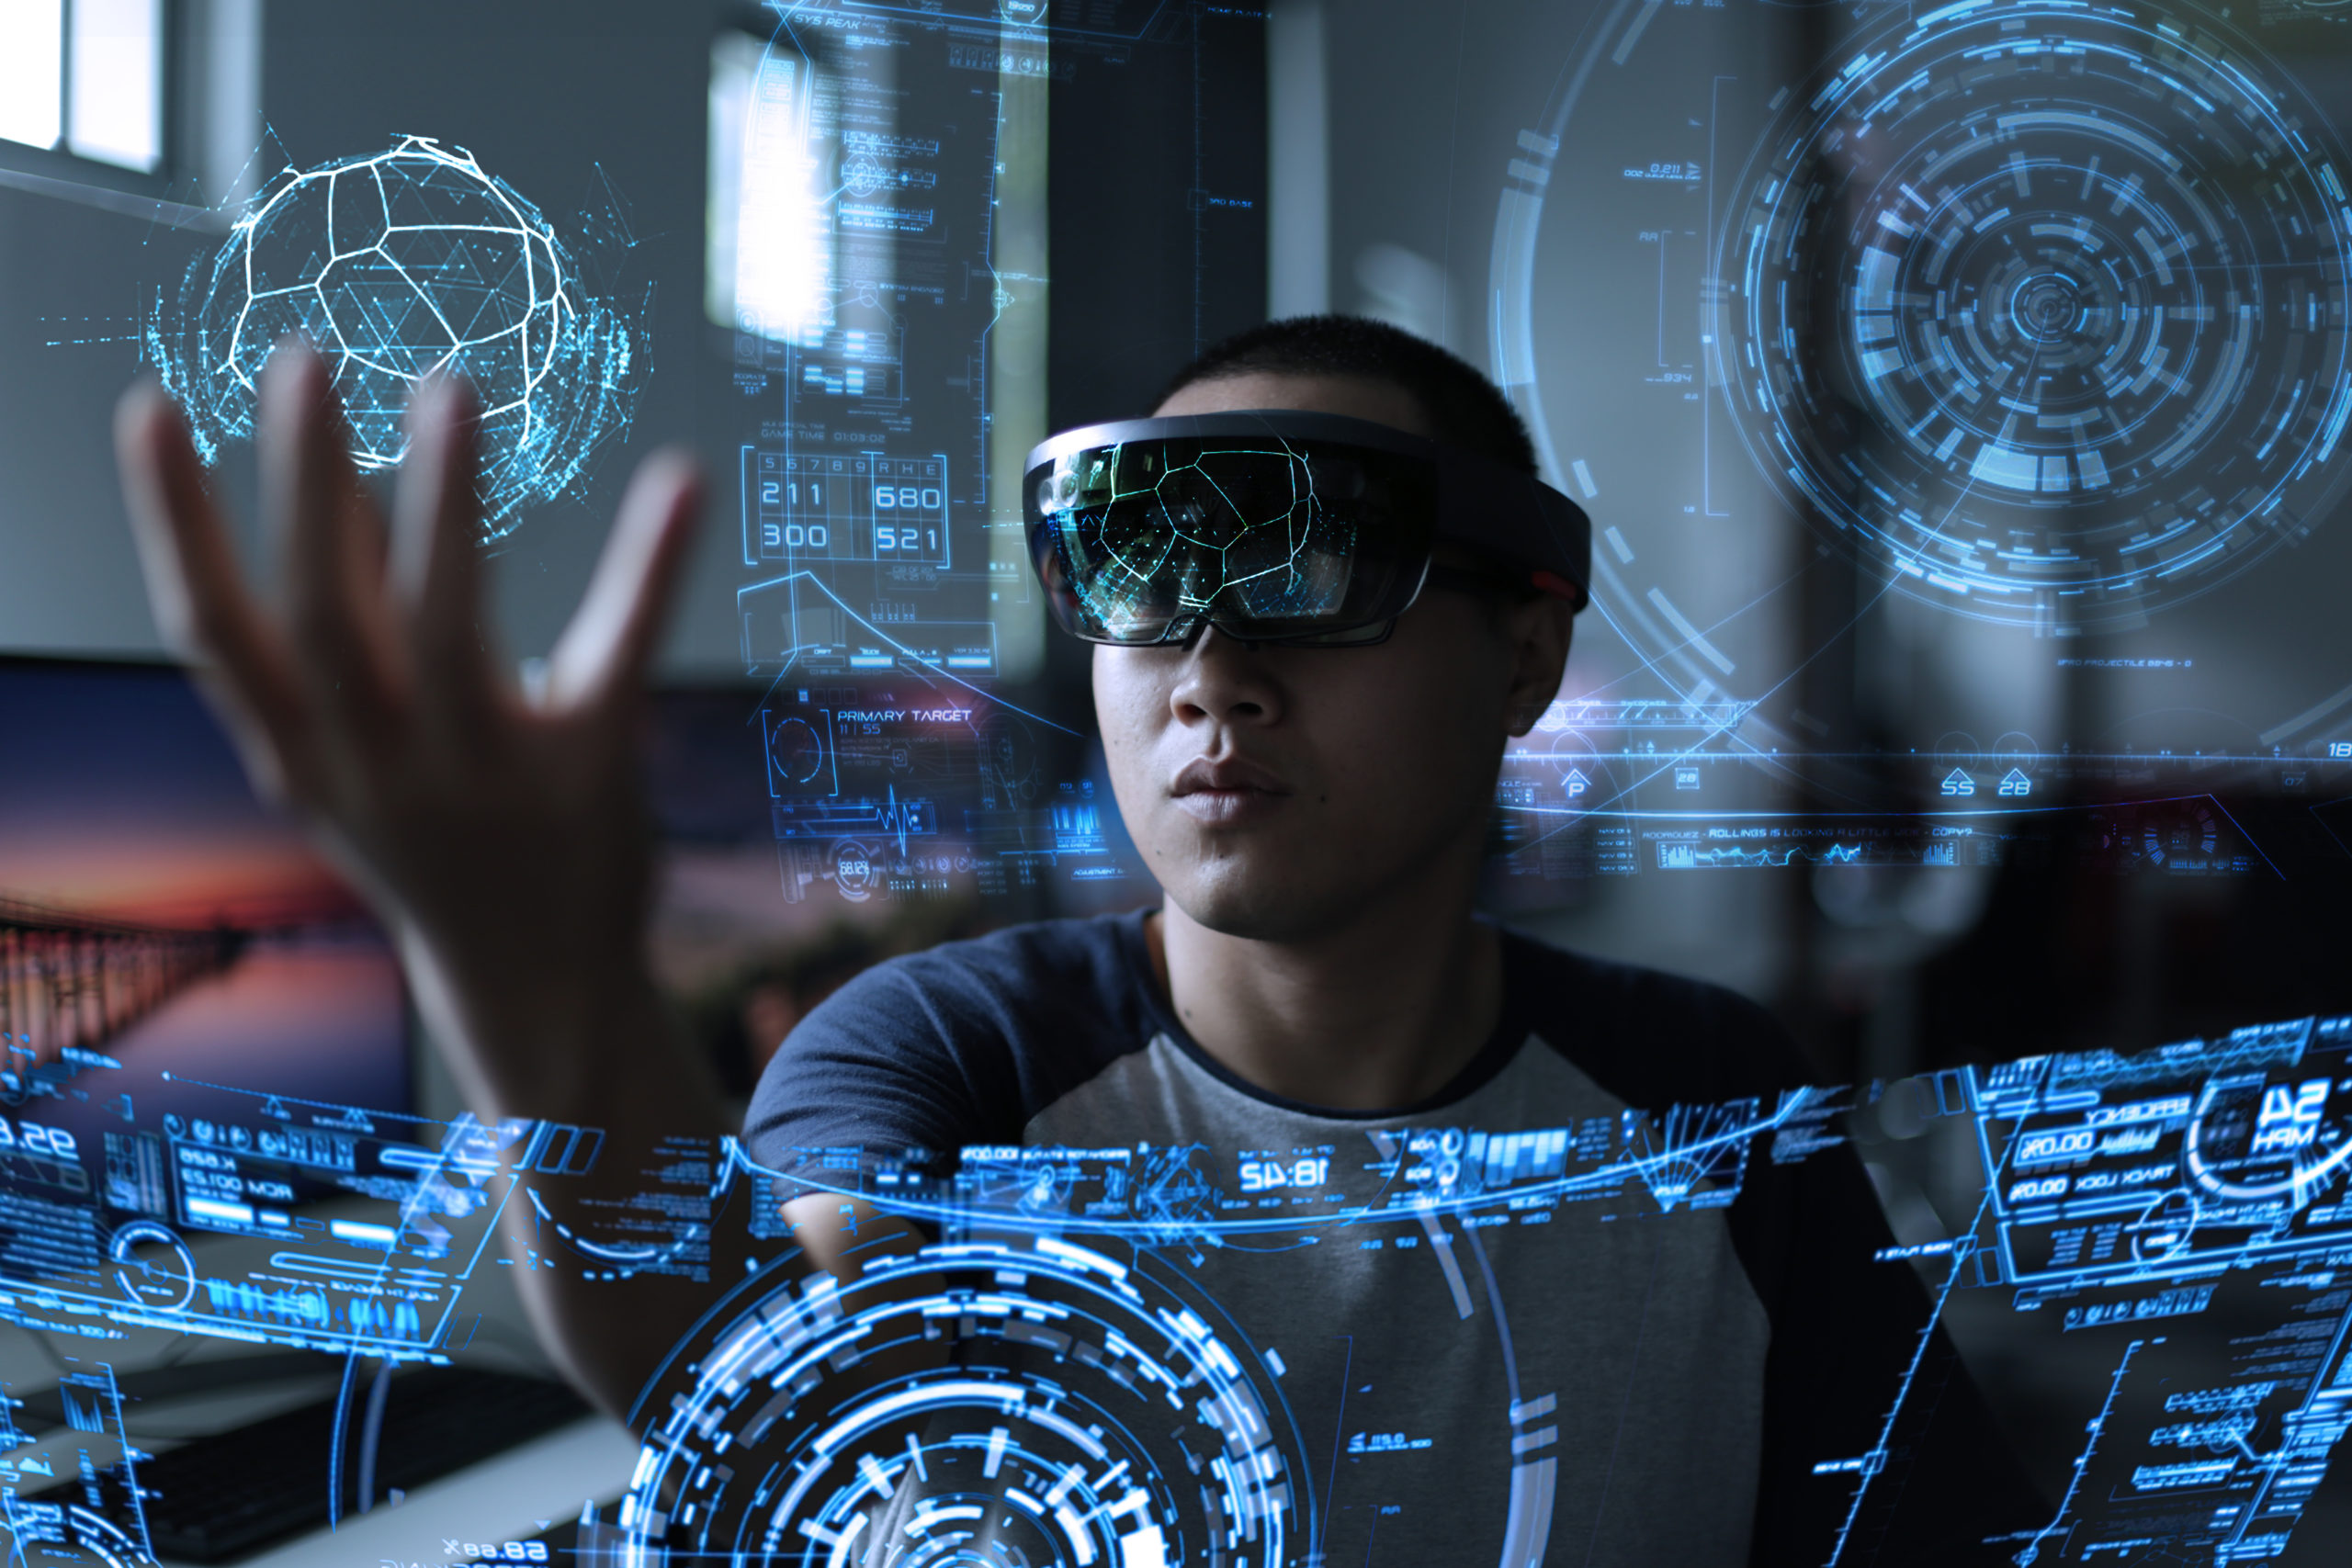 2020: The Year of AR and VR for Education and Training